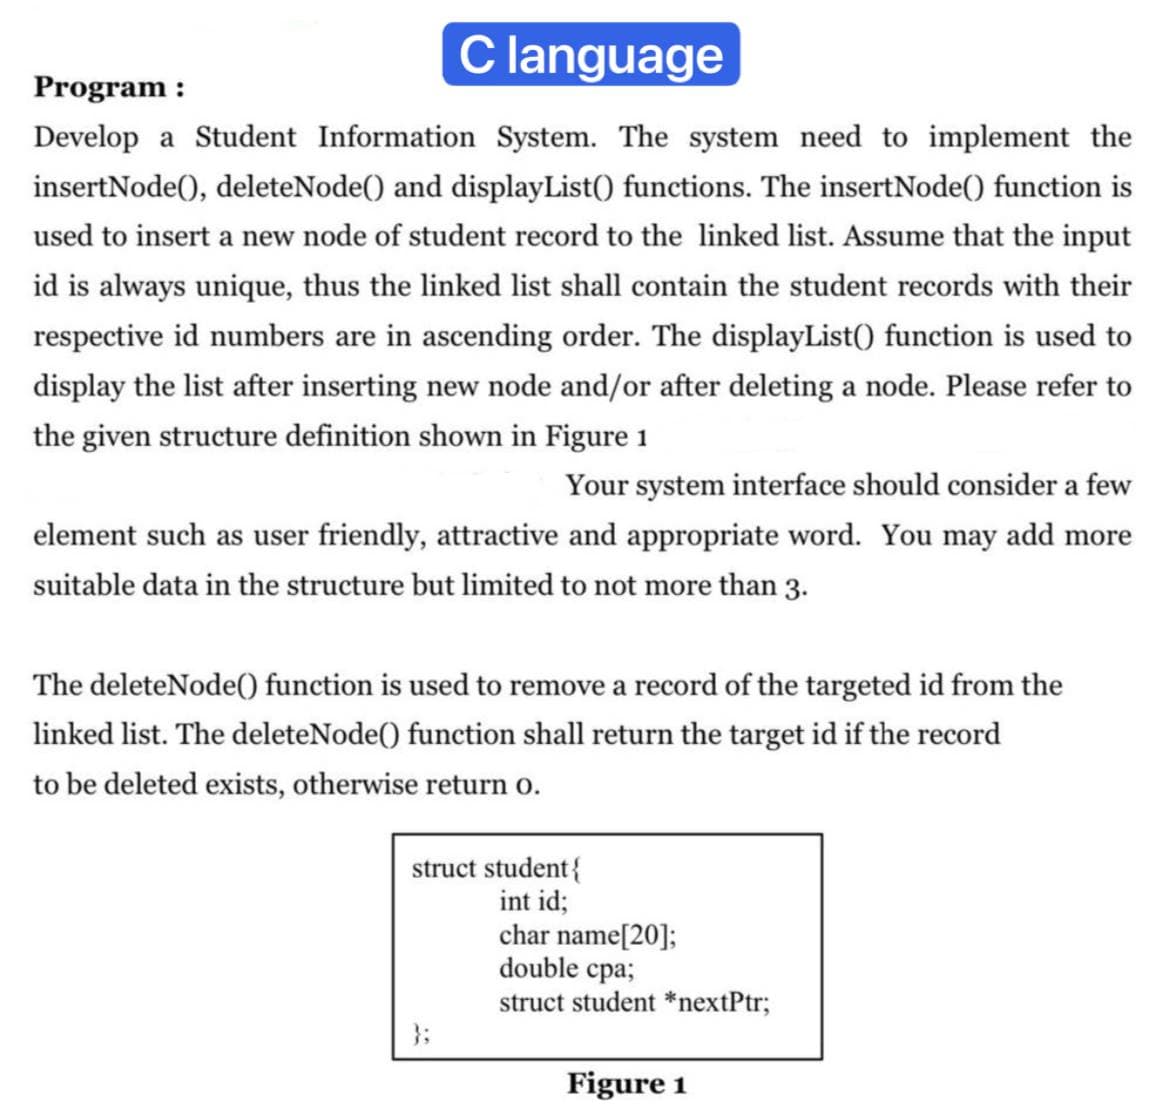 Clanguage
Program :
Develop a Student Information System. The system need to implement the
insertNode(), deleteNode() and displayList() functions. The insertNode() function is
used to insert a new node of student record to the linked list. Assume that the input
id is always unique, thus the linked list shall contain the student records with their
respective id numbers are in ascending order. The displayList() function is used to
display the list after inserting new node and/or after deleting a node. Please refer to
the given structure definition shown in Figure 1
Your system interface should consider a few
element such as user friendly, attractive and appropriate word. You may add more
suitable data in the structure but limited to not more than 3.
The deleteNode() function is used to remove a record of the targeted id from the
linked list. The deleteNode() function shall return the target id if the record
to be deleted exists, otherwise return o.
struct student{
int id;
char name[20];
double cpa;
struct student *nextPtr;
}3;
Figure 1
